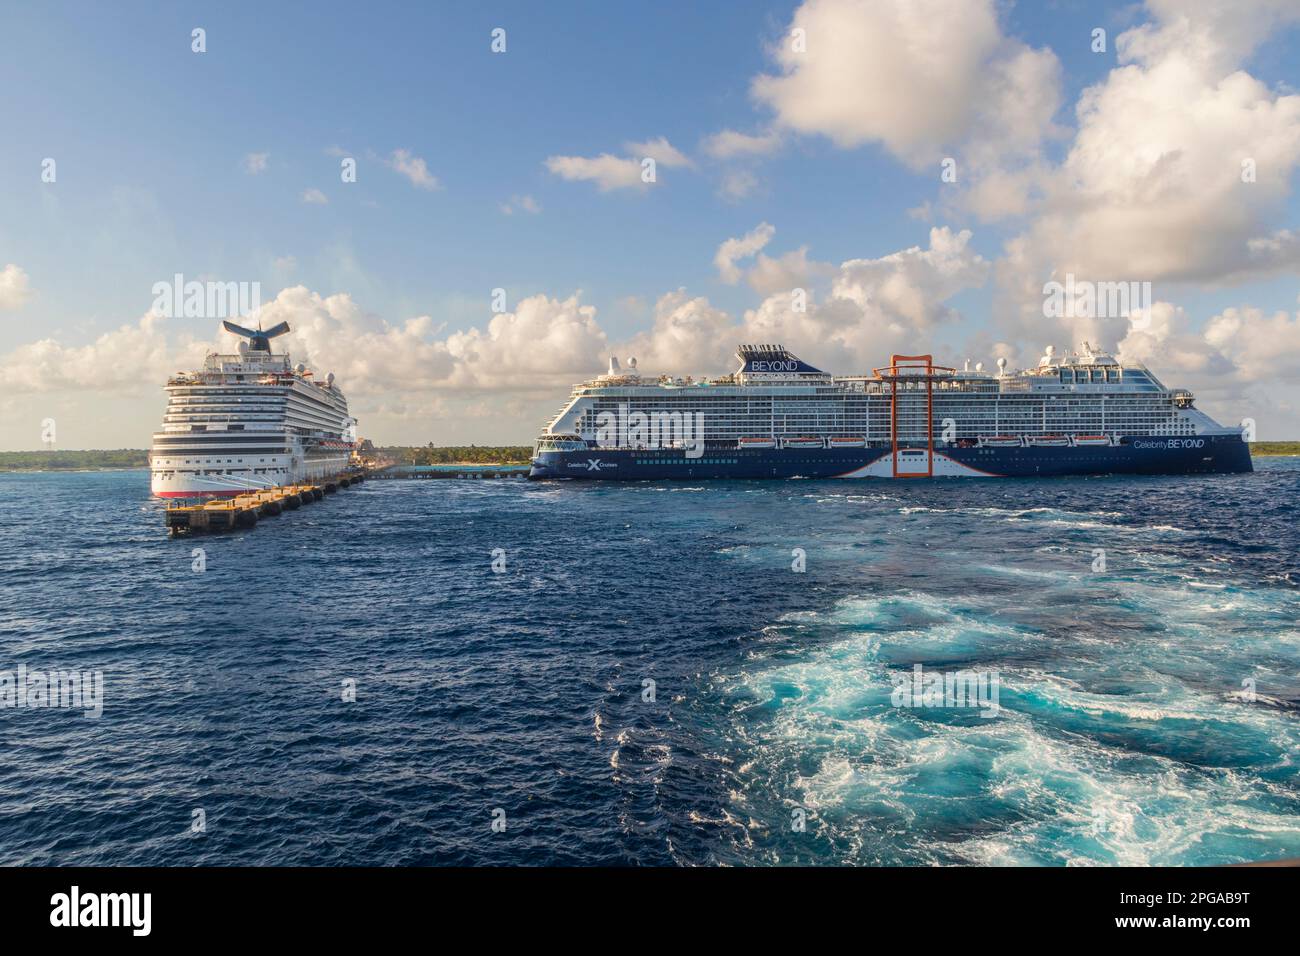 Celebrity BEYOND and Carnival BREEZE cruise ships at Costa Maya Mexico Carbbean Cruise Port and Tourist Location.- viewed from Ruby Princess Cruise Sh Stock Photo